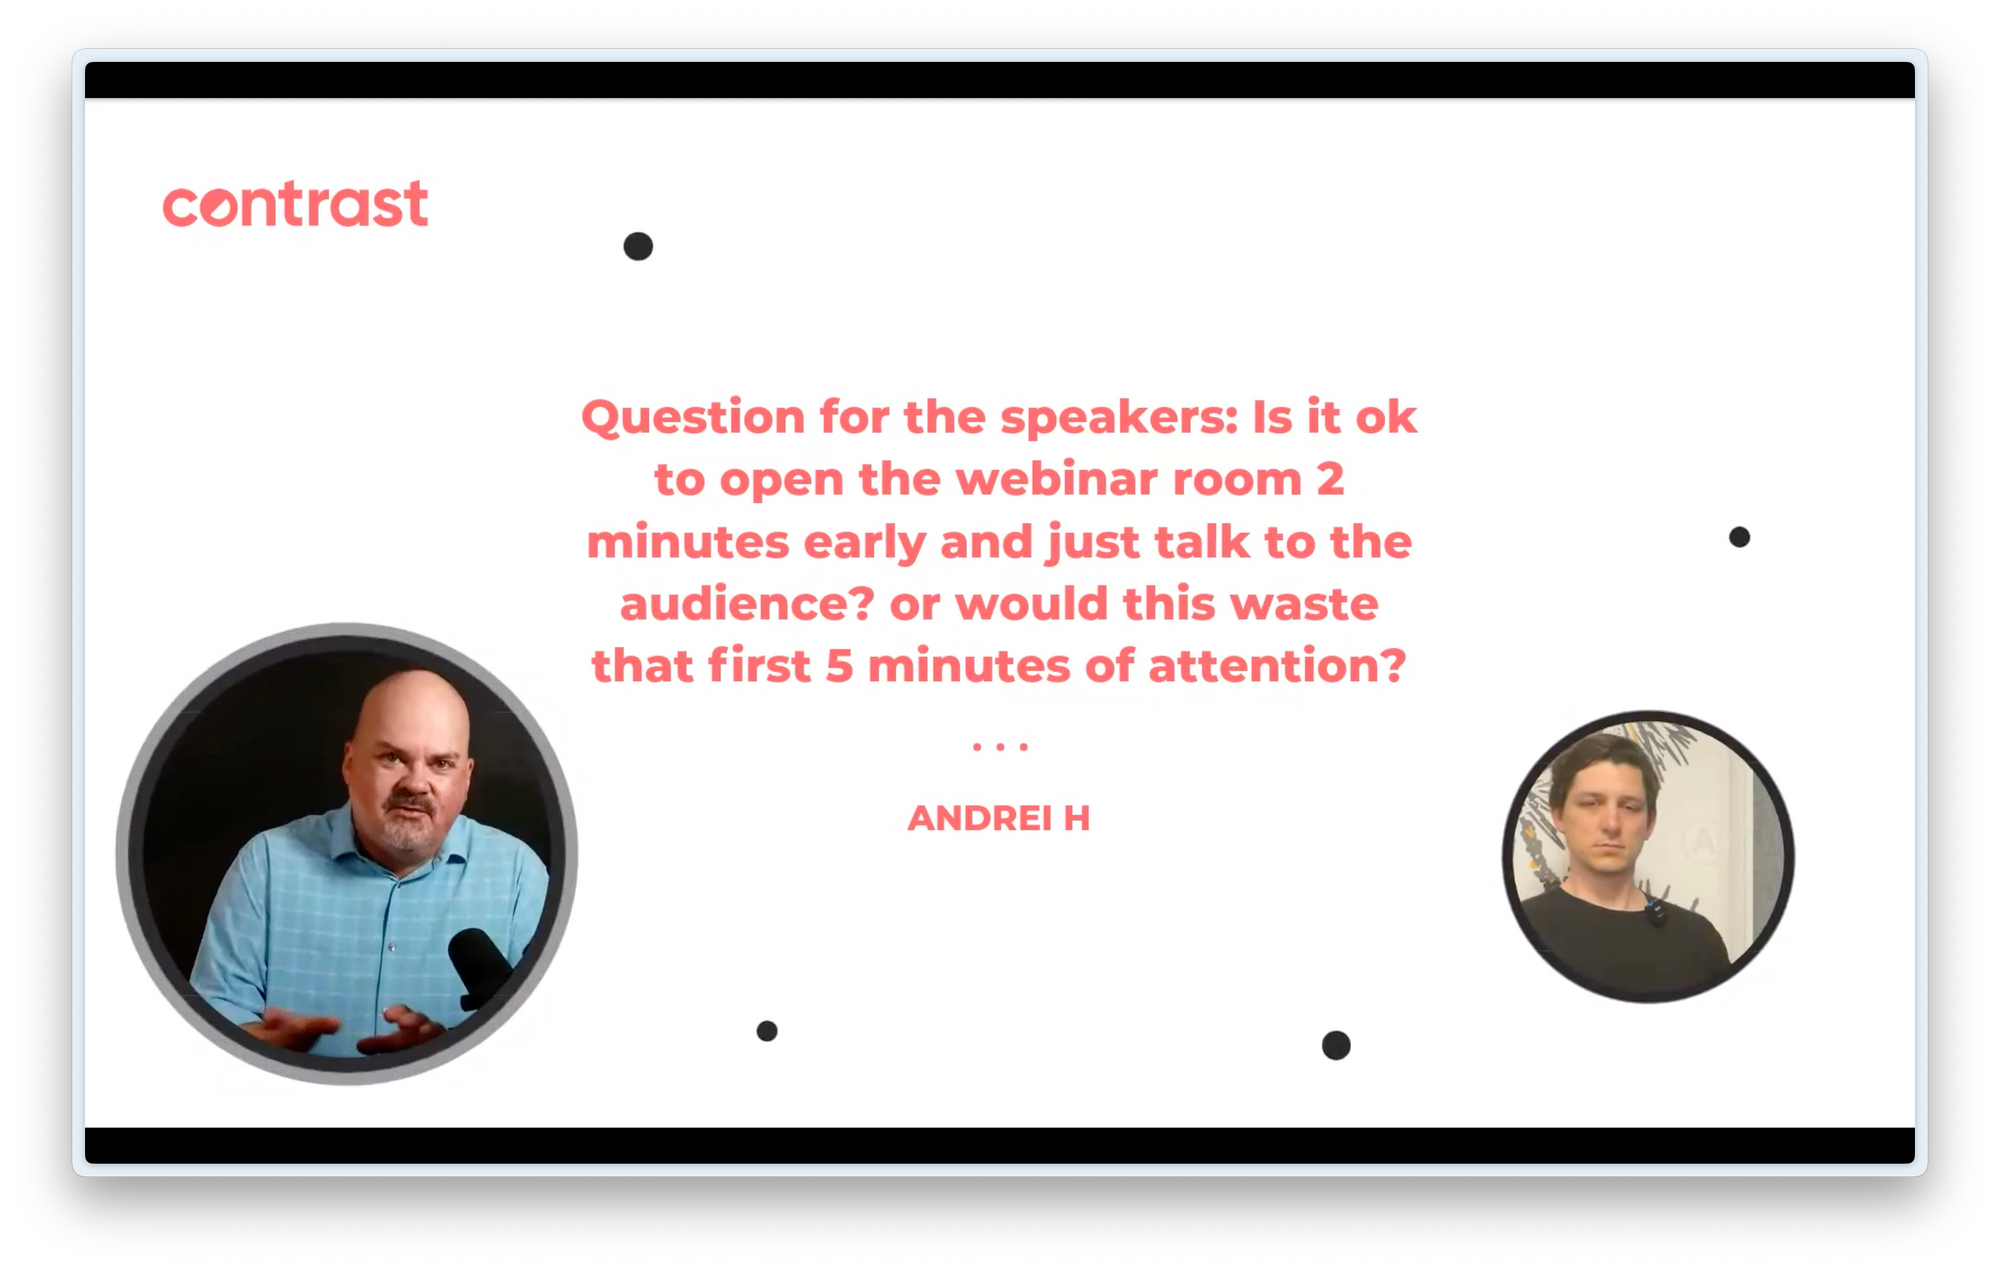 Screenshot that shows the Contrast webinar product with two speakers and a question